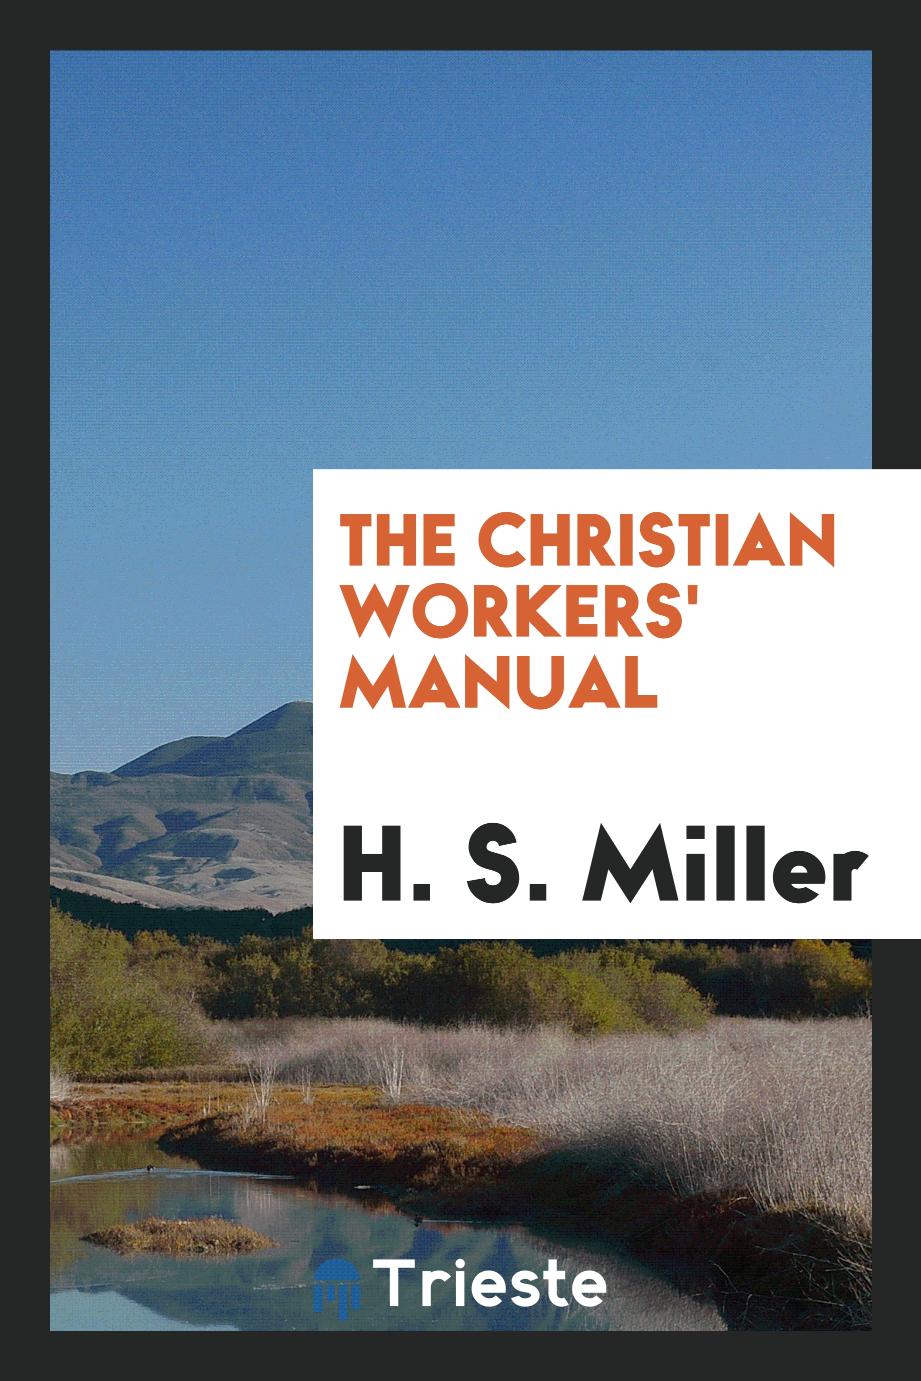 The Christian workers' manual